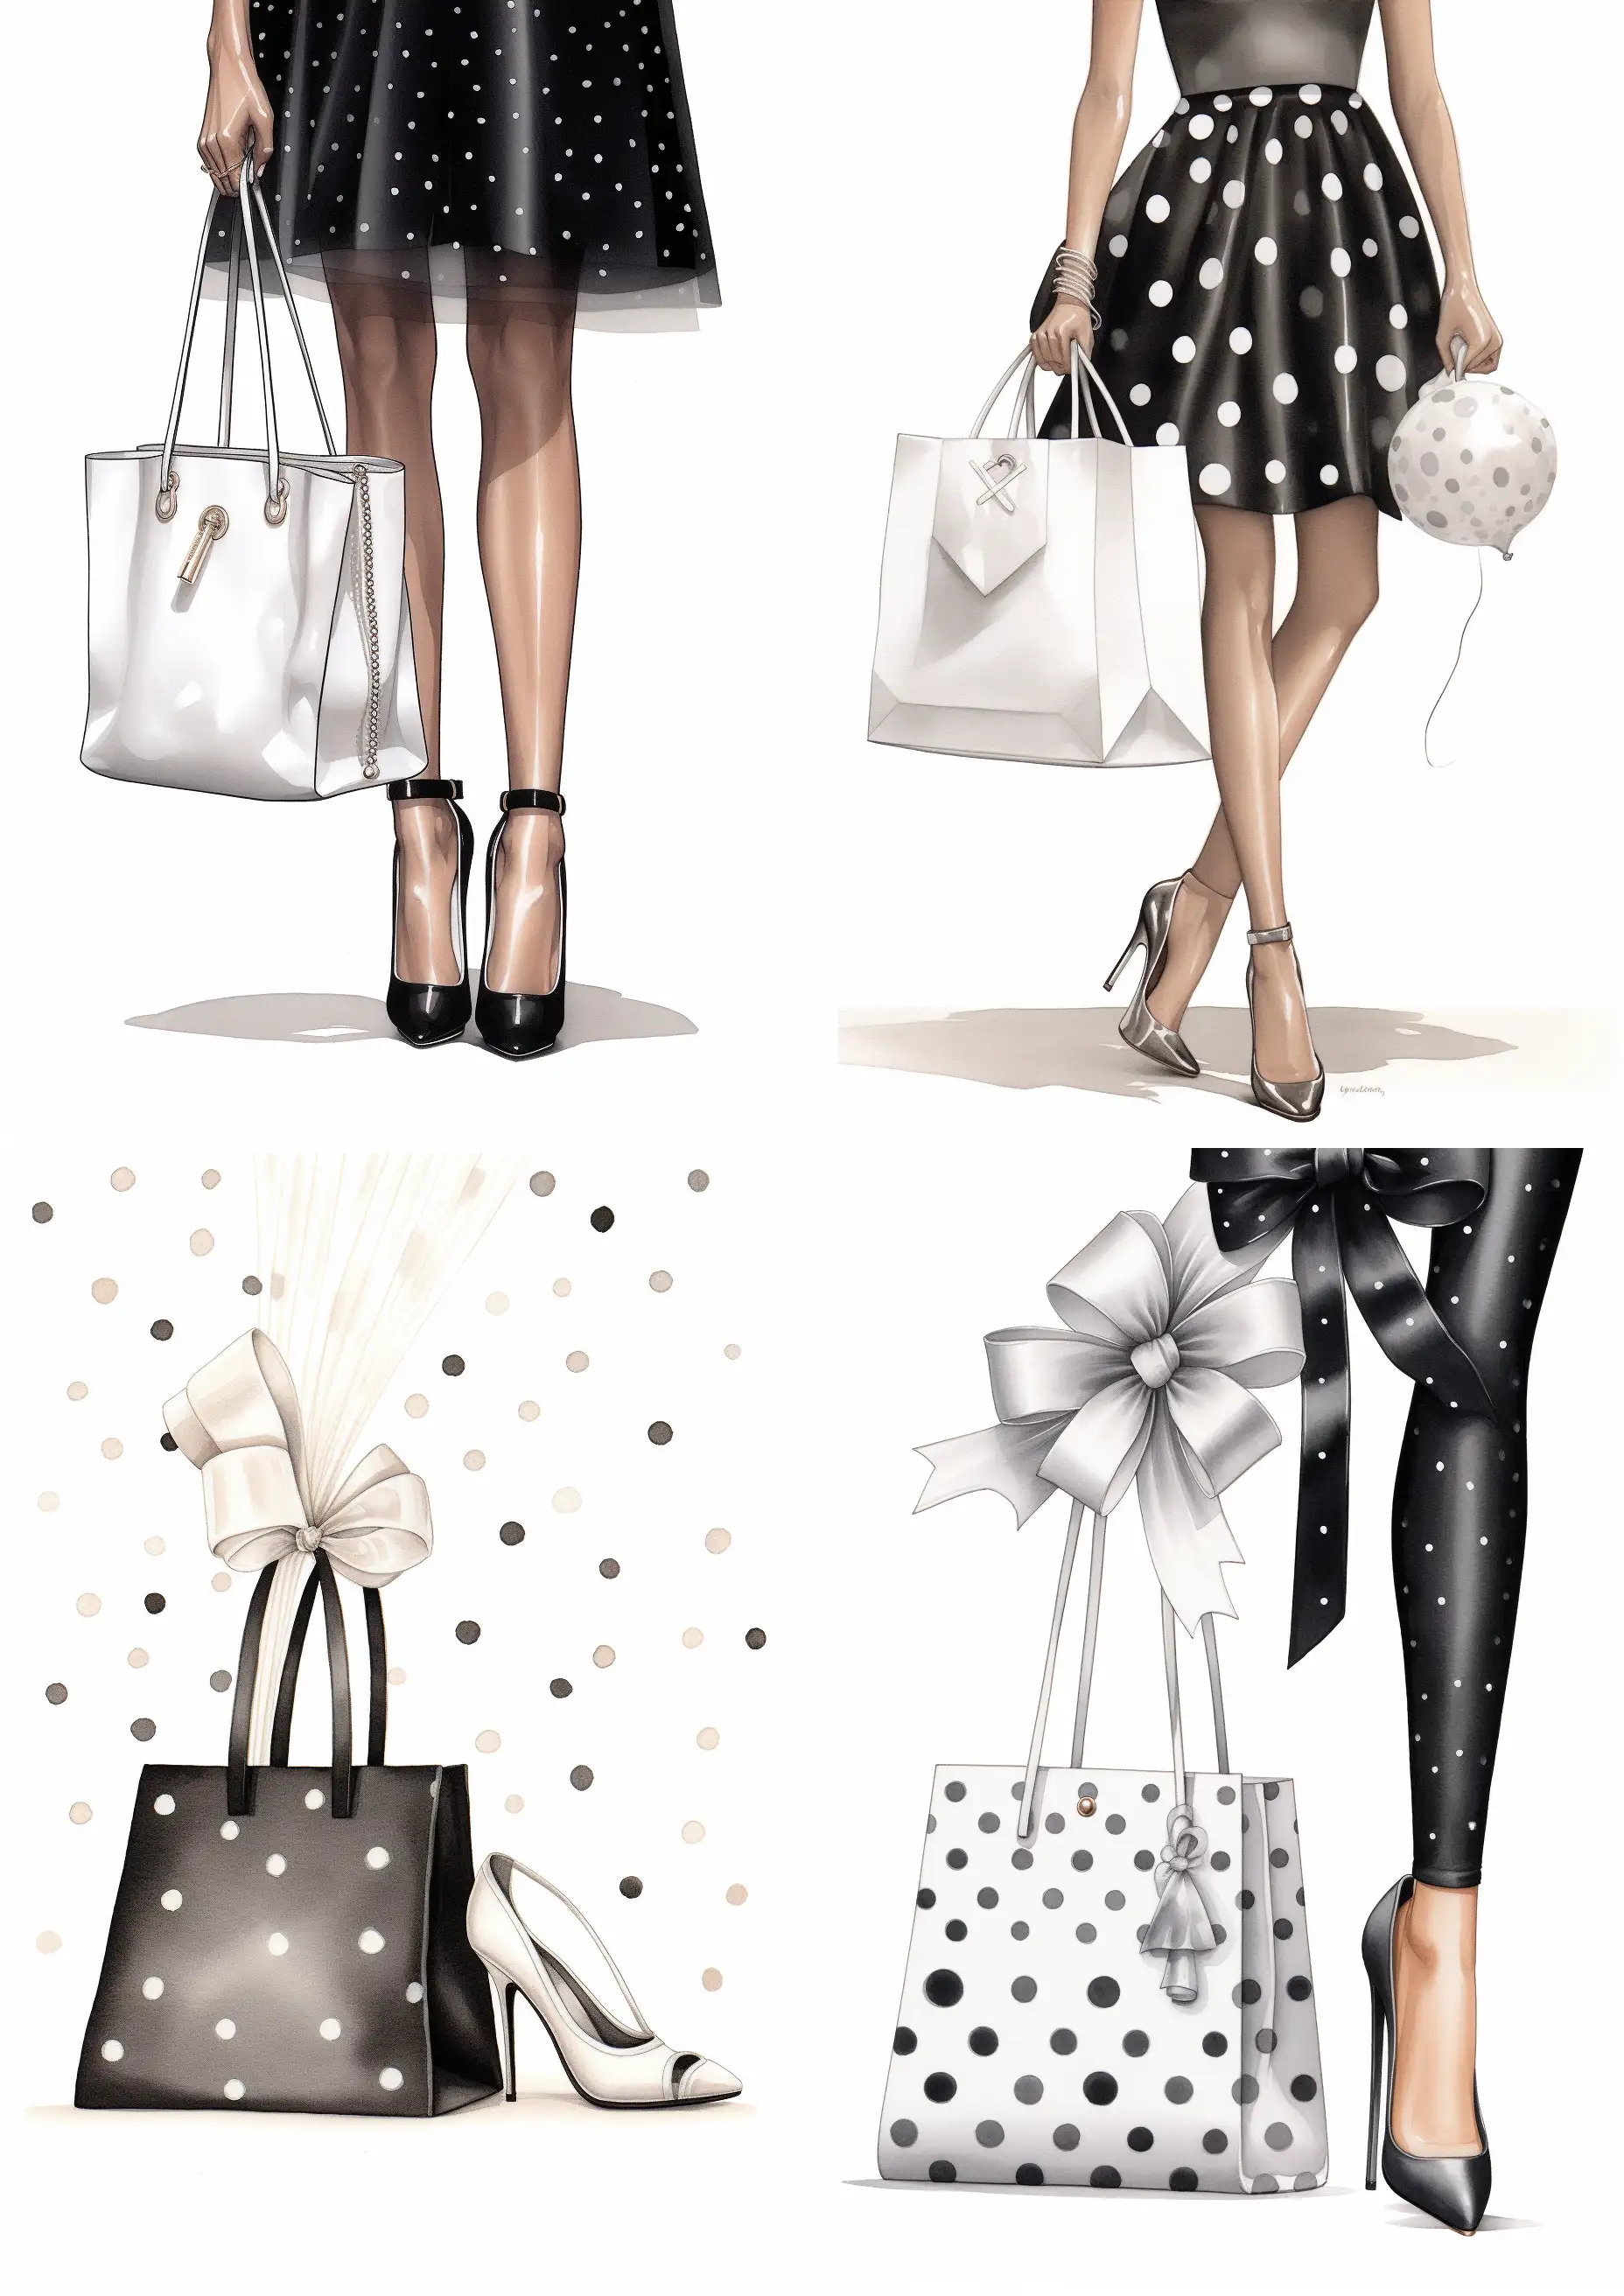 Legs, skirt sparkly white polka dot tulle, elegance black high heels, by Valentino, cartoon style, details, copic marker technique, realistic human figure, fashion illustration, white background with fancy coco chanel shopping bag, full length --ar 5:7 